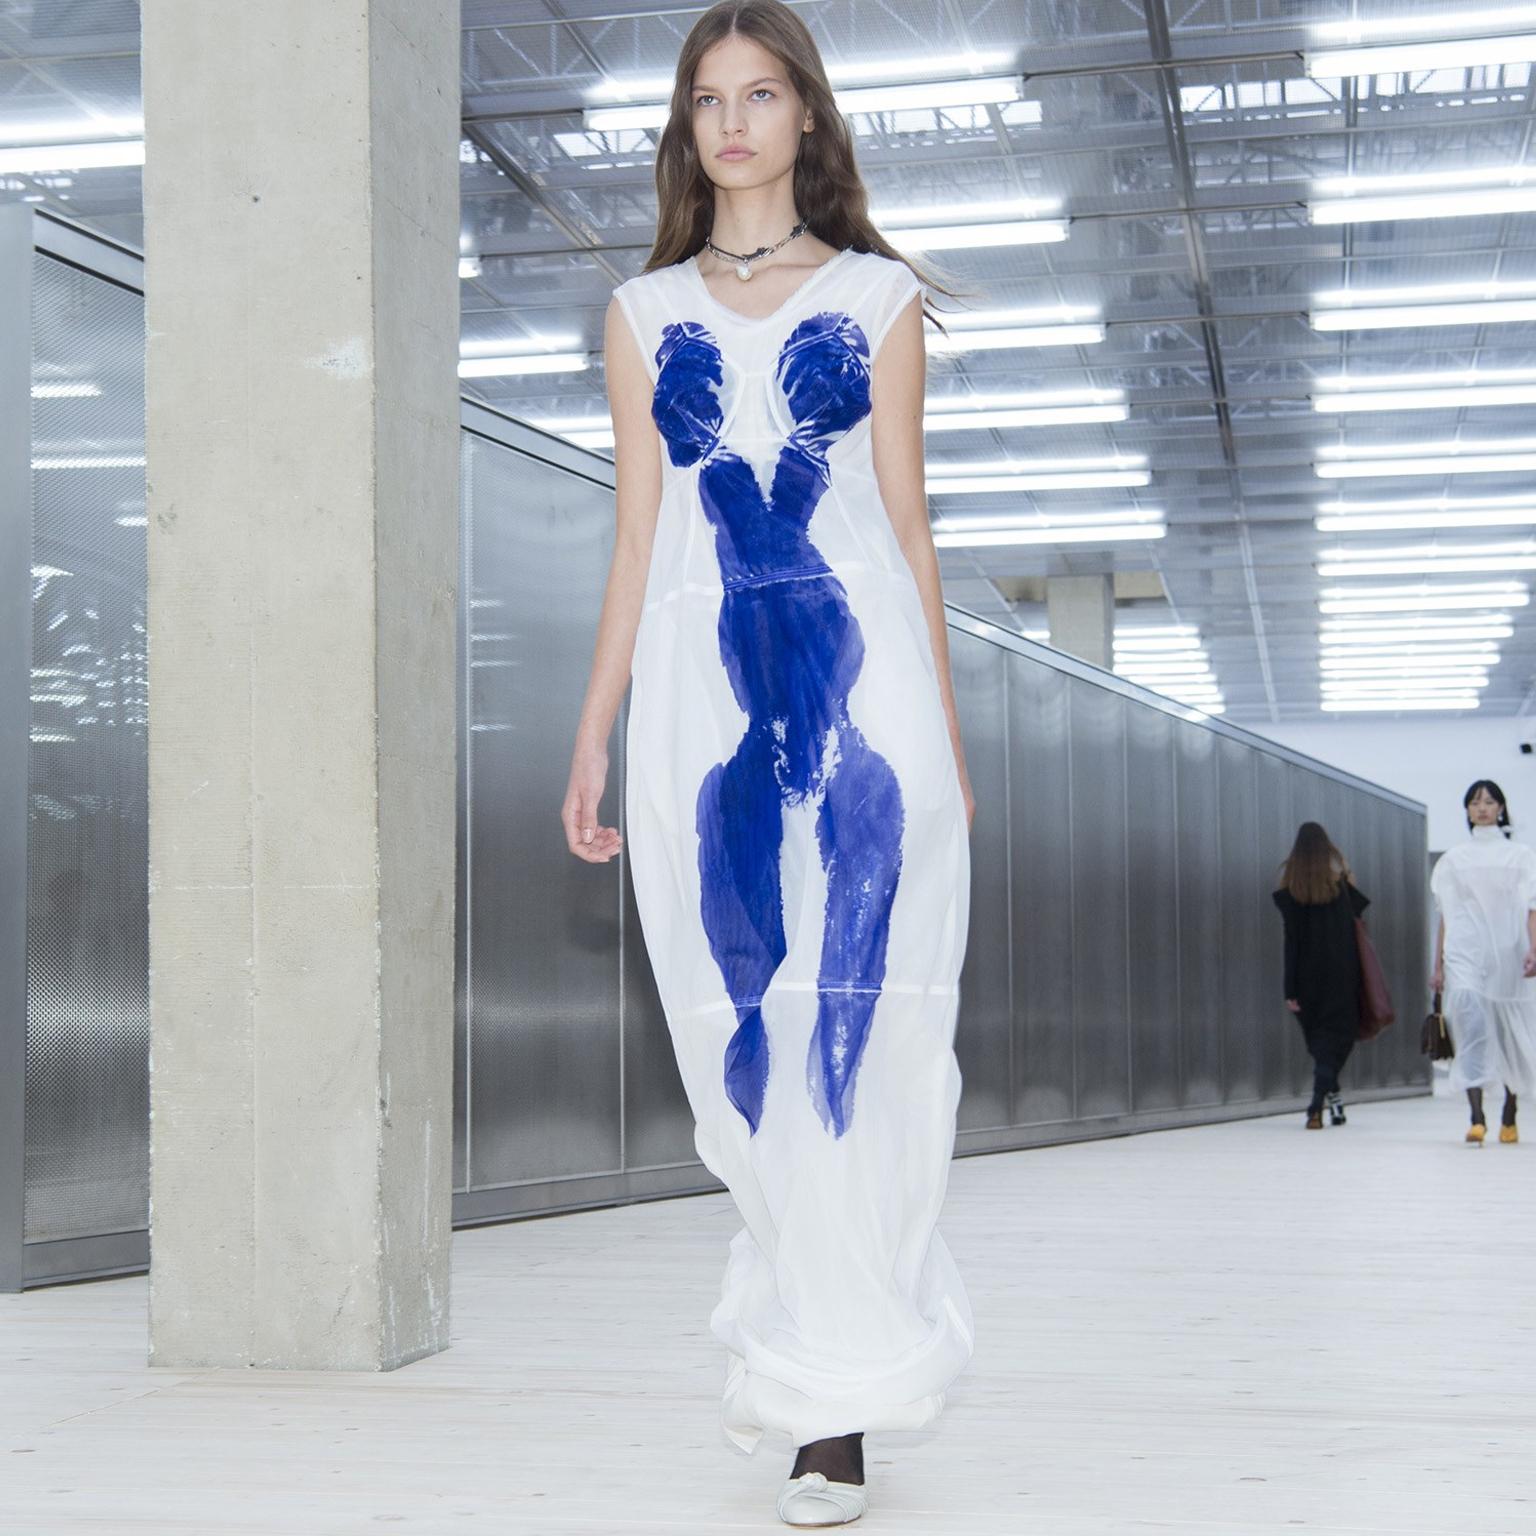 CELINE BY PHOEBE PHILO
YVES KLEIN COLLABORATION FROM SPRING SUMMER 2017 COLLECTION
Ramie, viscose. White base with iconic Yves Klein blue body printed at front. Scoop neckline. Sleeveless. Frayed edges along seams. 3D cone cut at bust. Bodycon